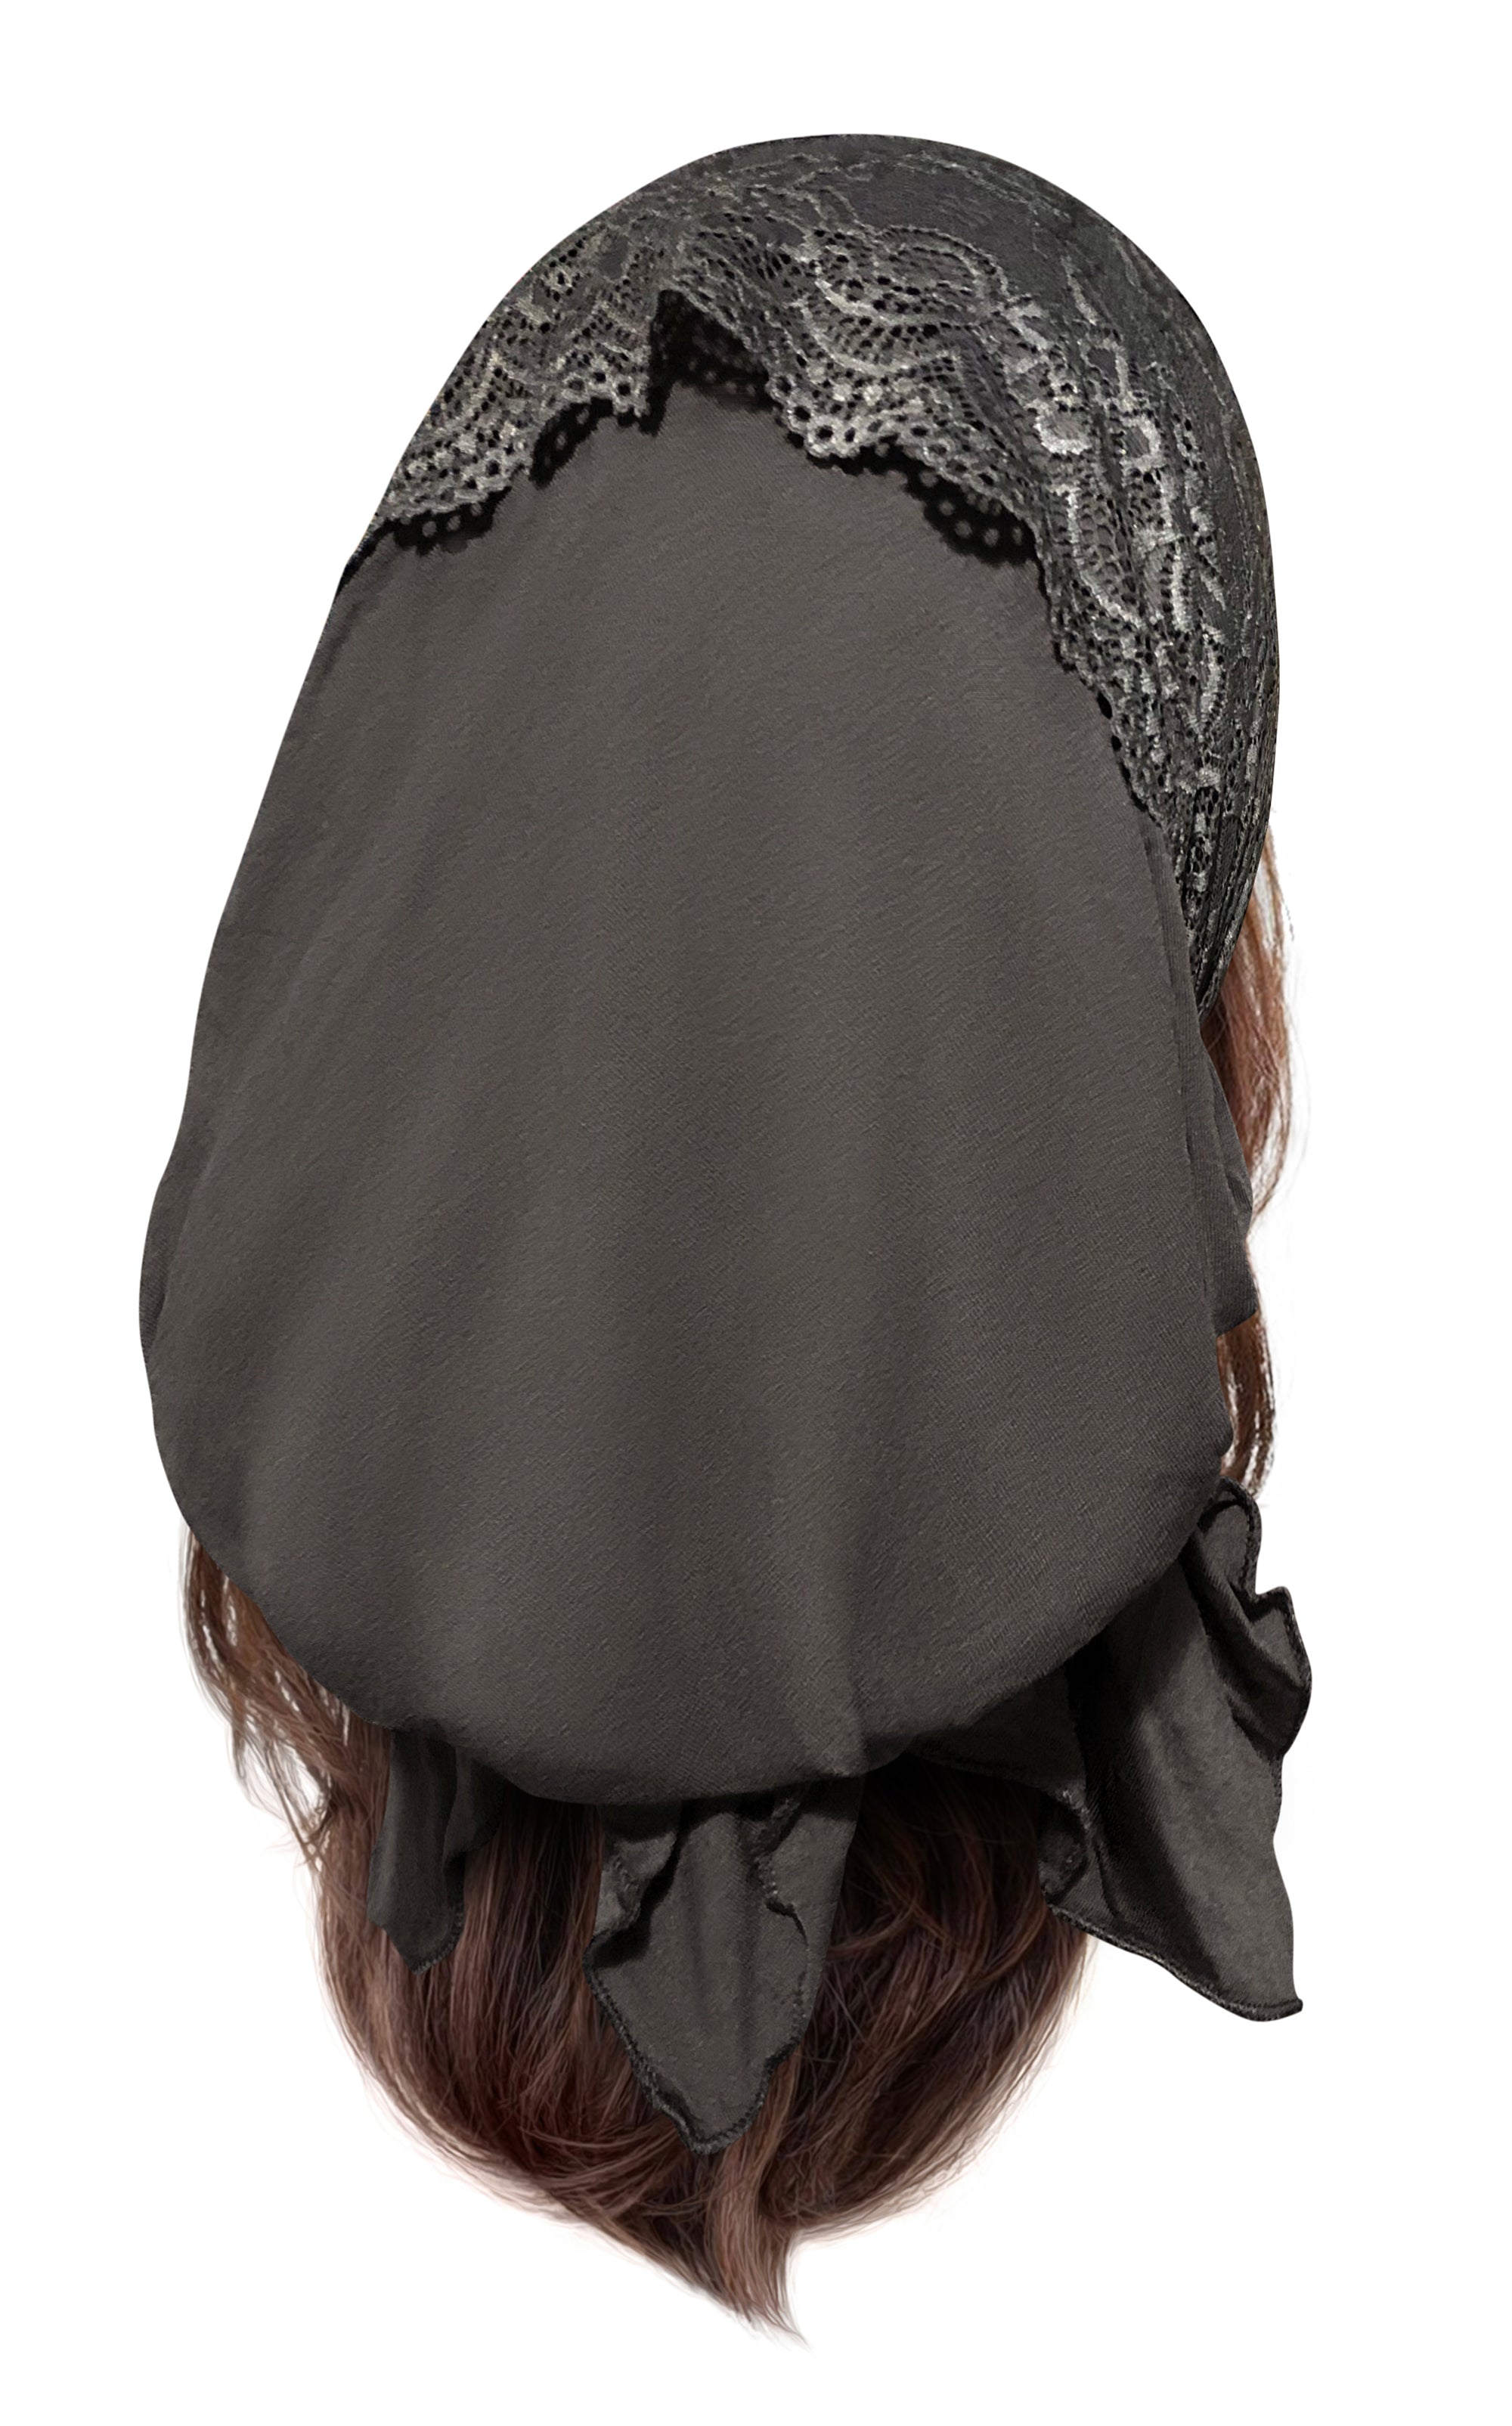 Gray headscarf with wide gray lace